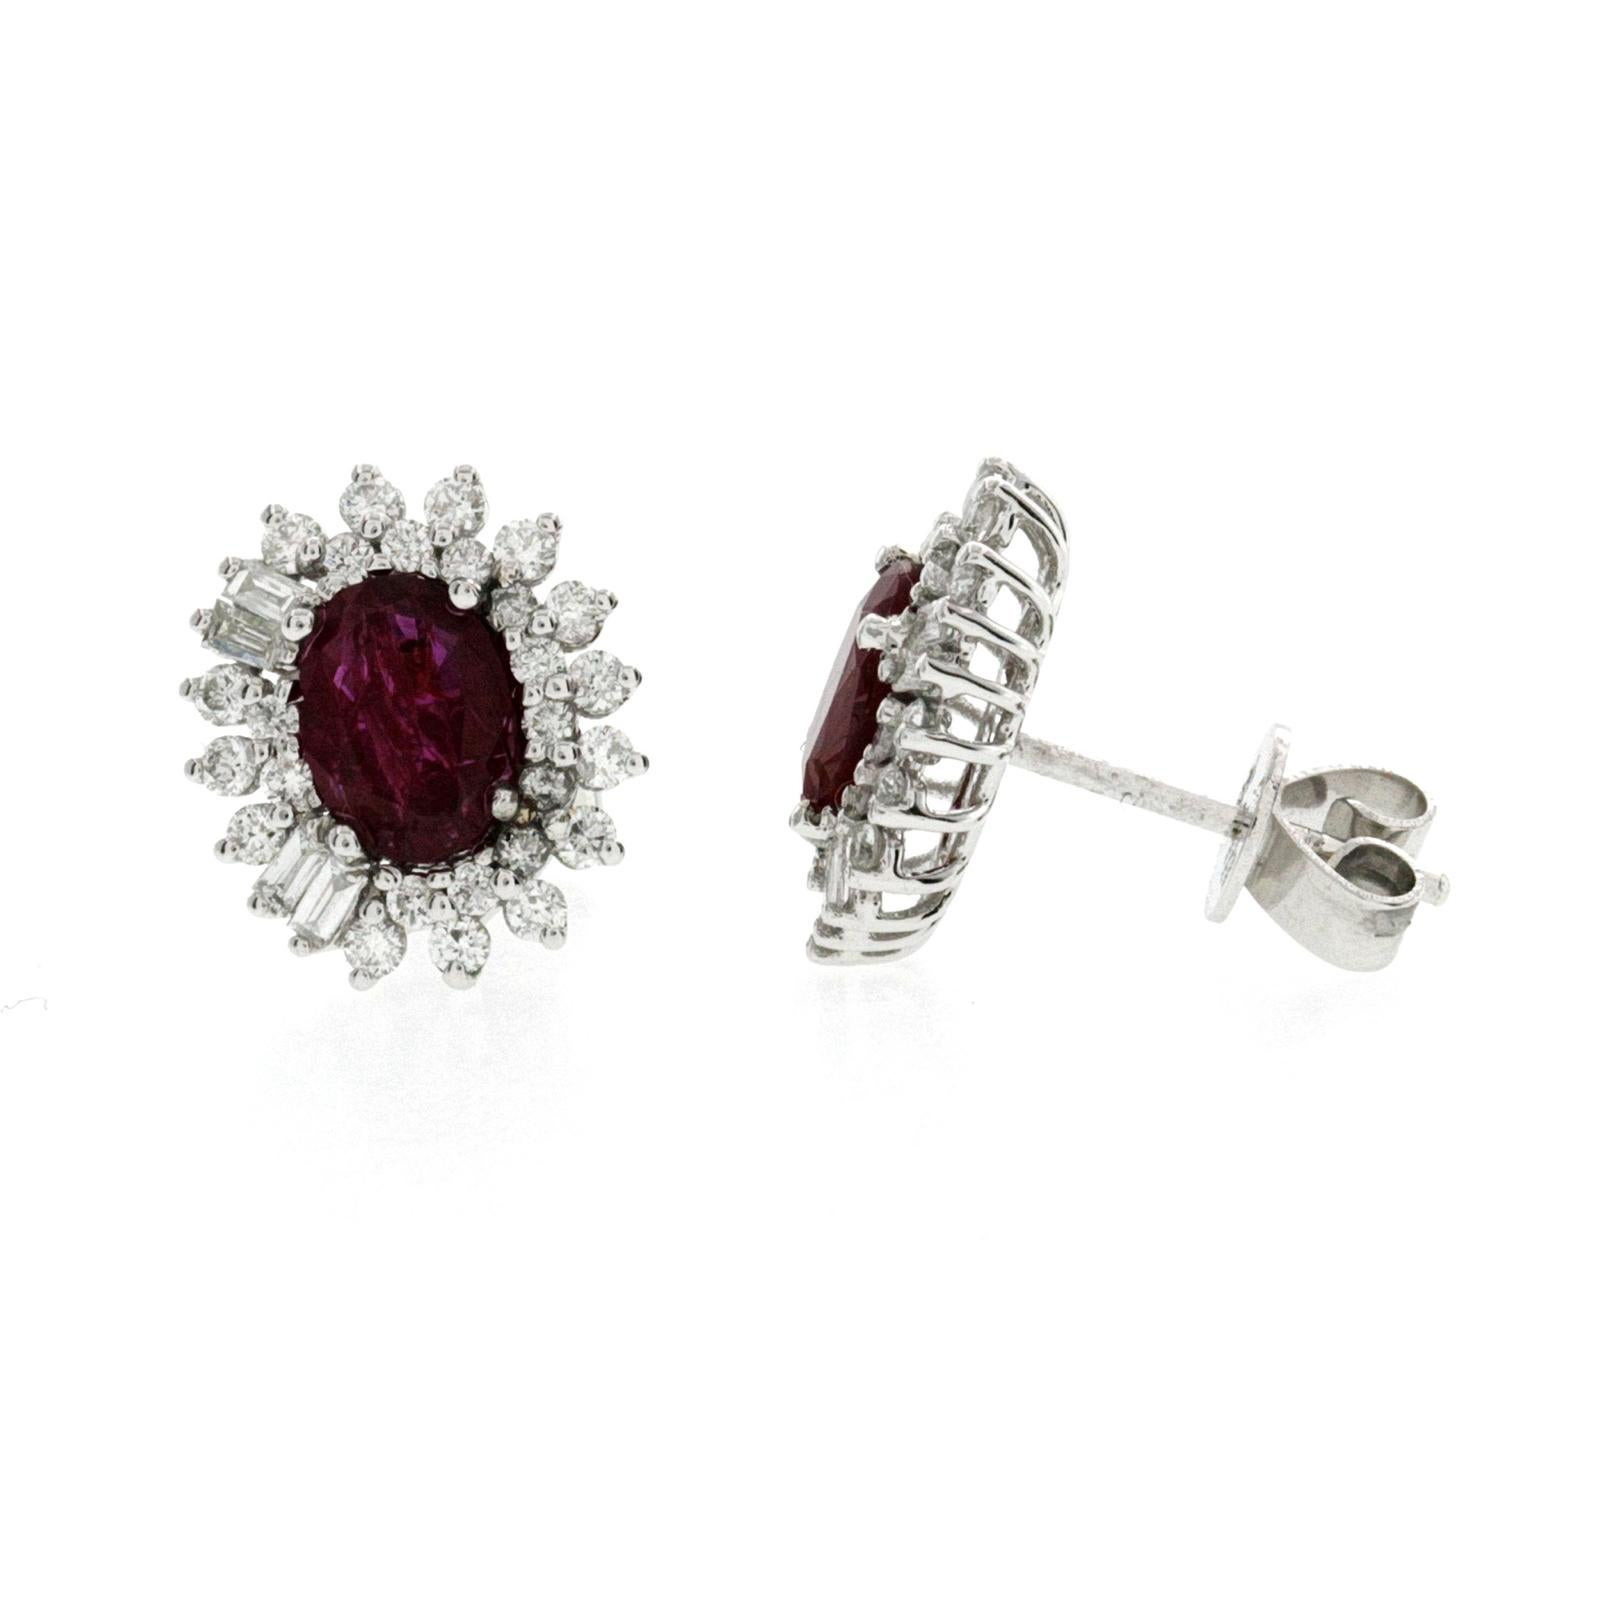 100% Authentic

Height: 10 mm

Width: 8.5 mm

Metal:14K White Gold

Hallmarks: 14K

Total Weight: 2.8 Grams

Stone Type: 1.69 CT Natural Ruby and 0.88 CT G VS2 Diamonds

Condition: New

Estimated Price: $3500

Stock Number: E3805